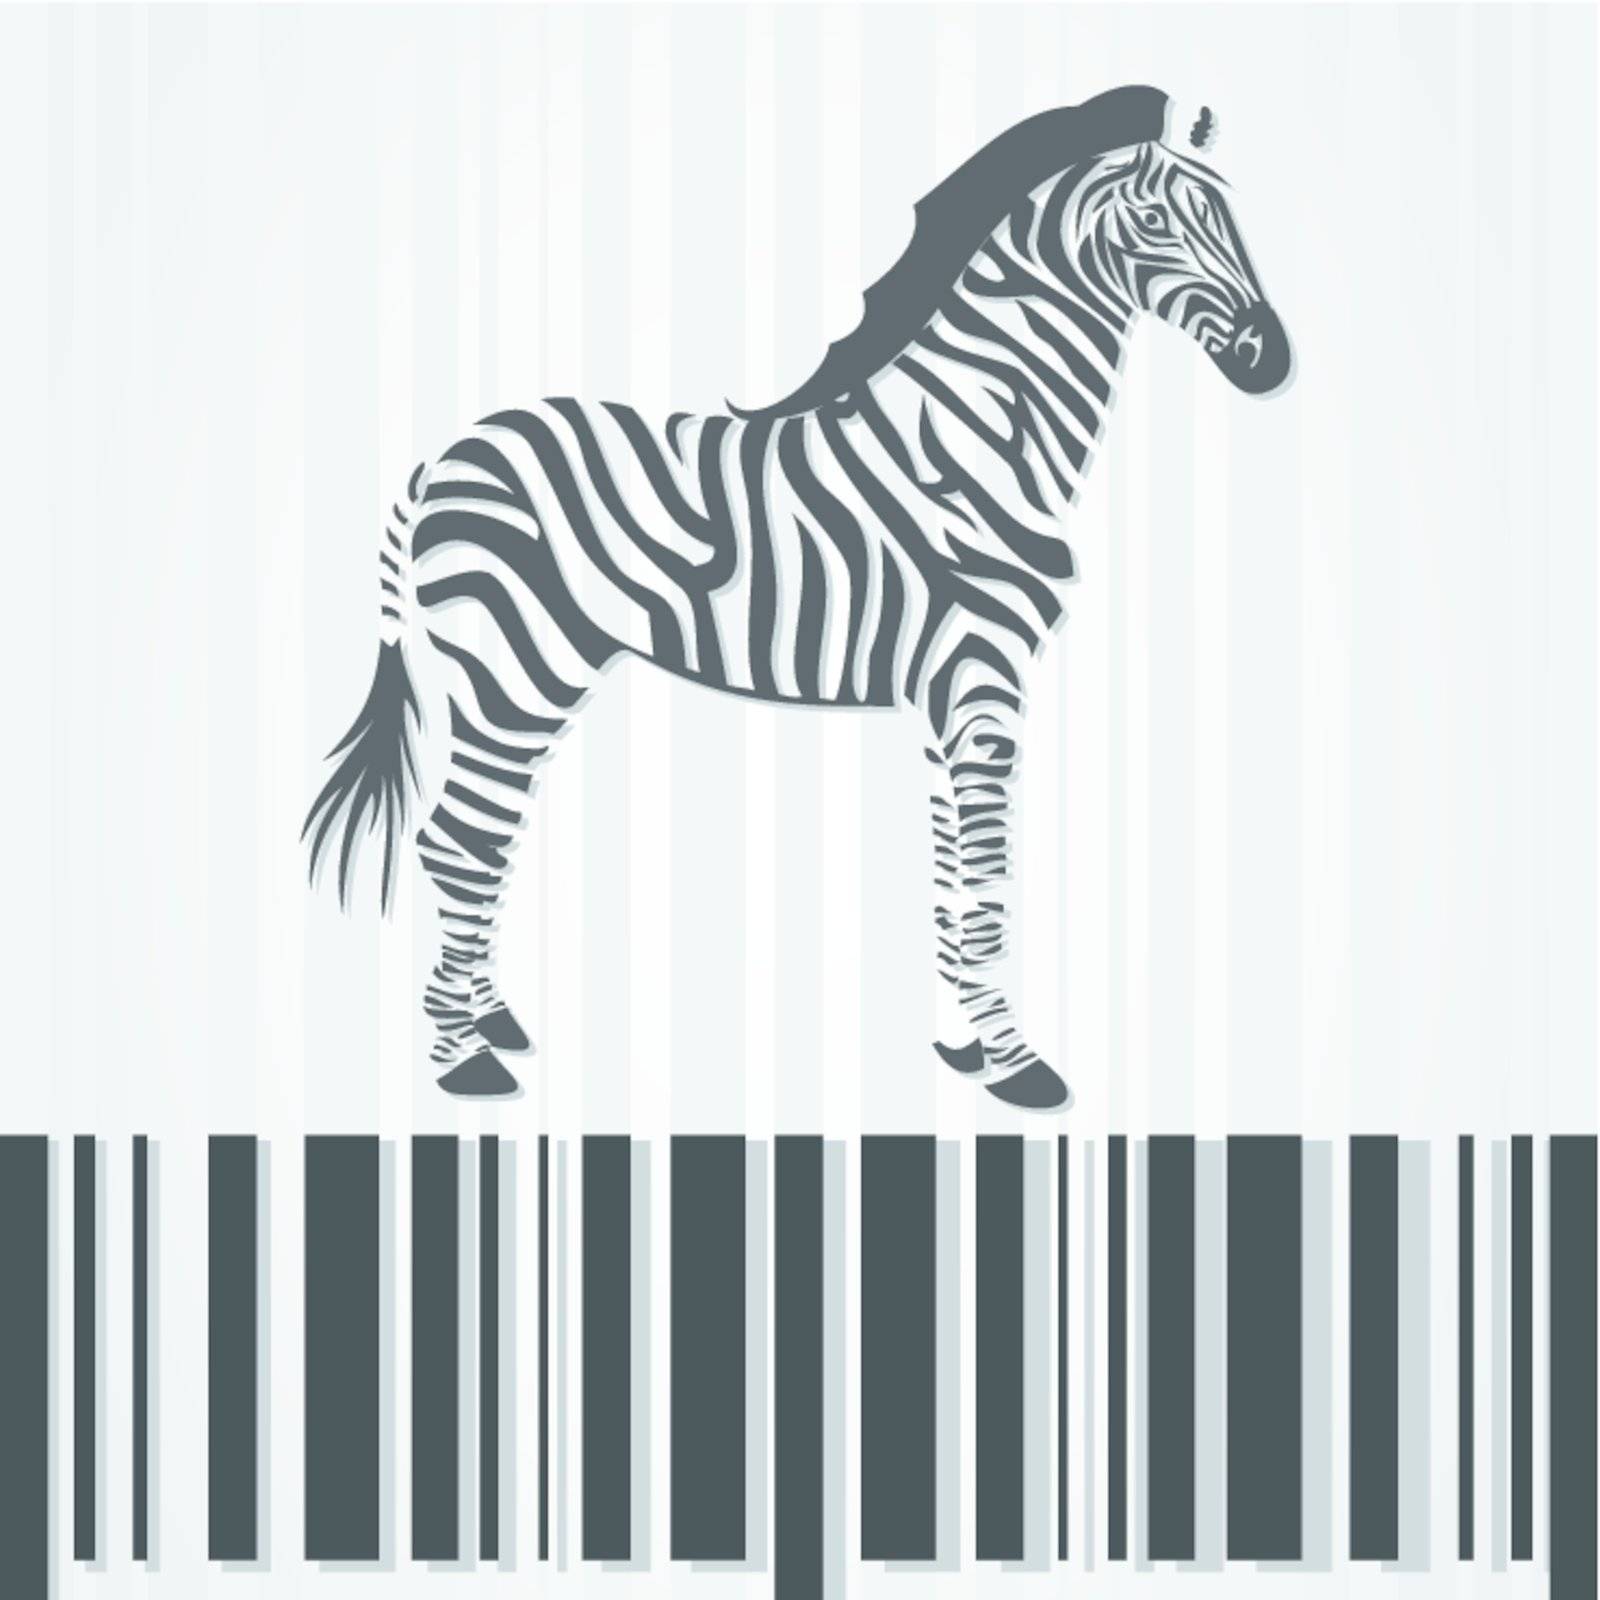 The horse a zebra costs on a stroke a code. A vector illustration